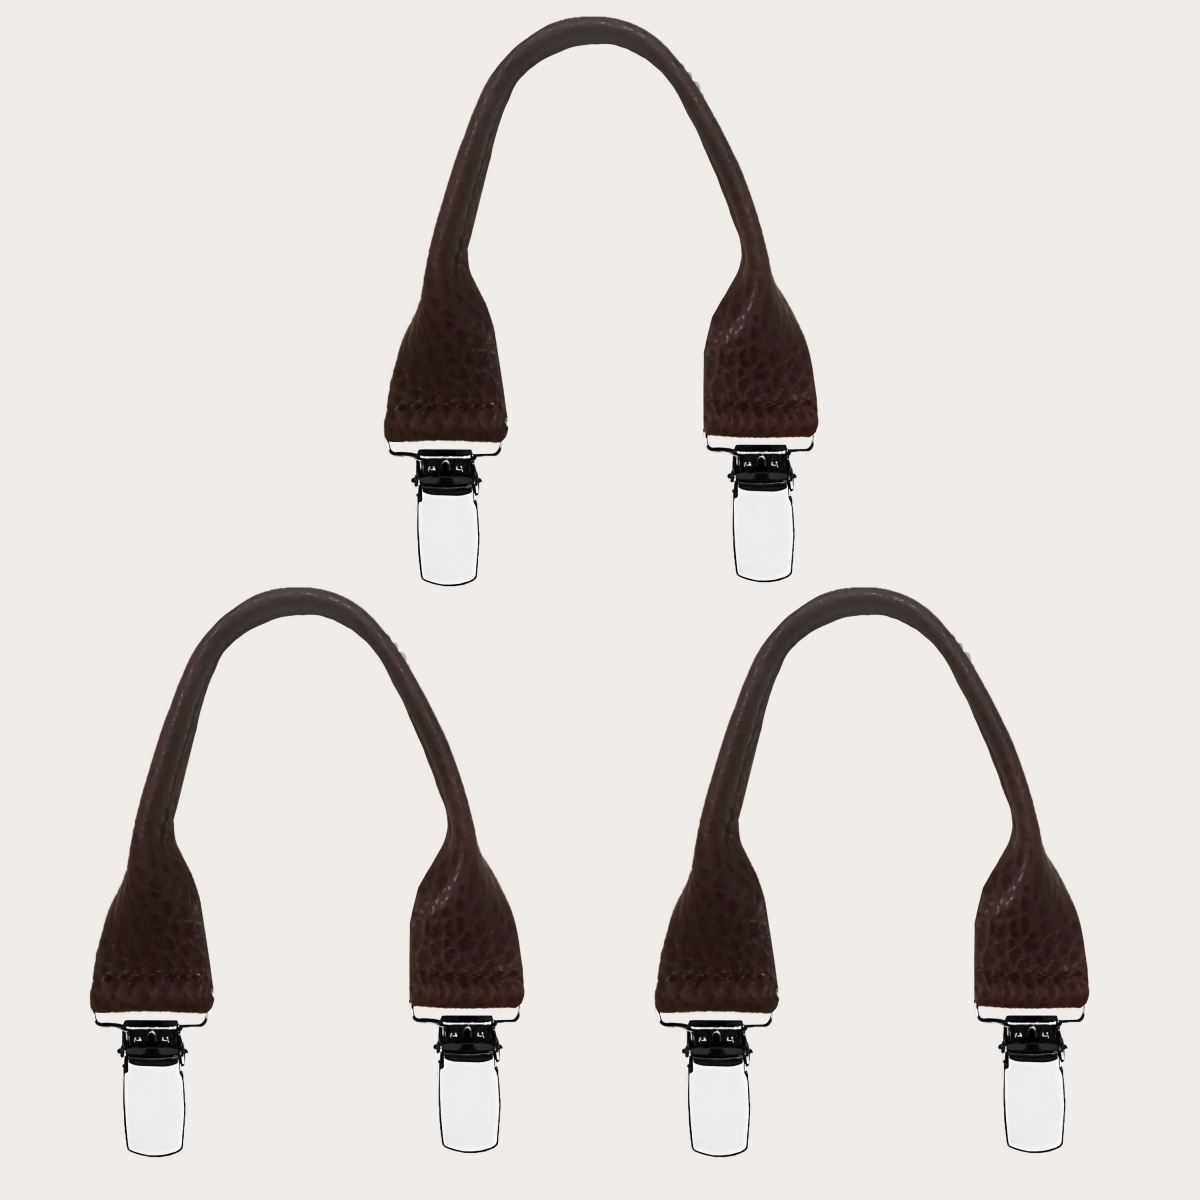 BRUCLE Tumbled leather mustache connectors with clips, 3 pcs., dark brown